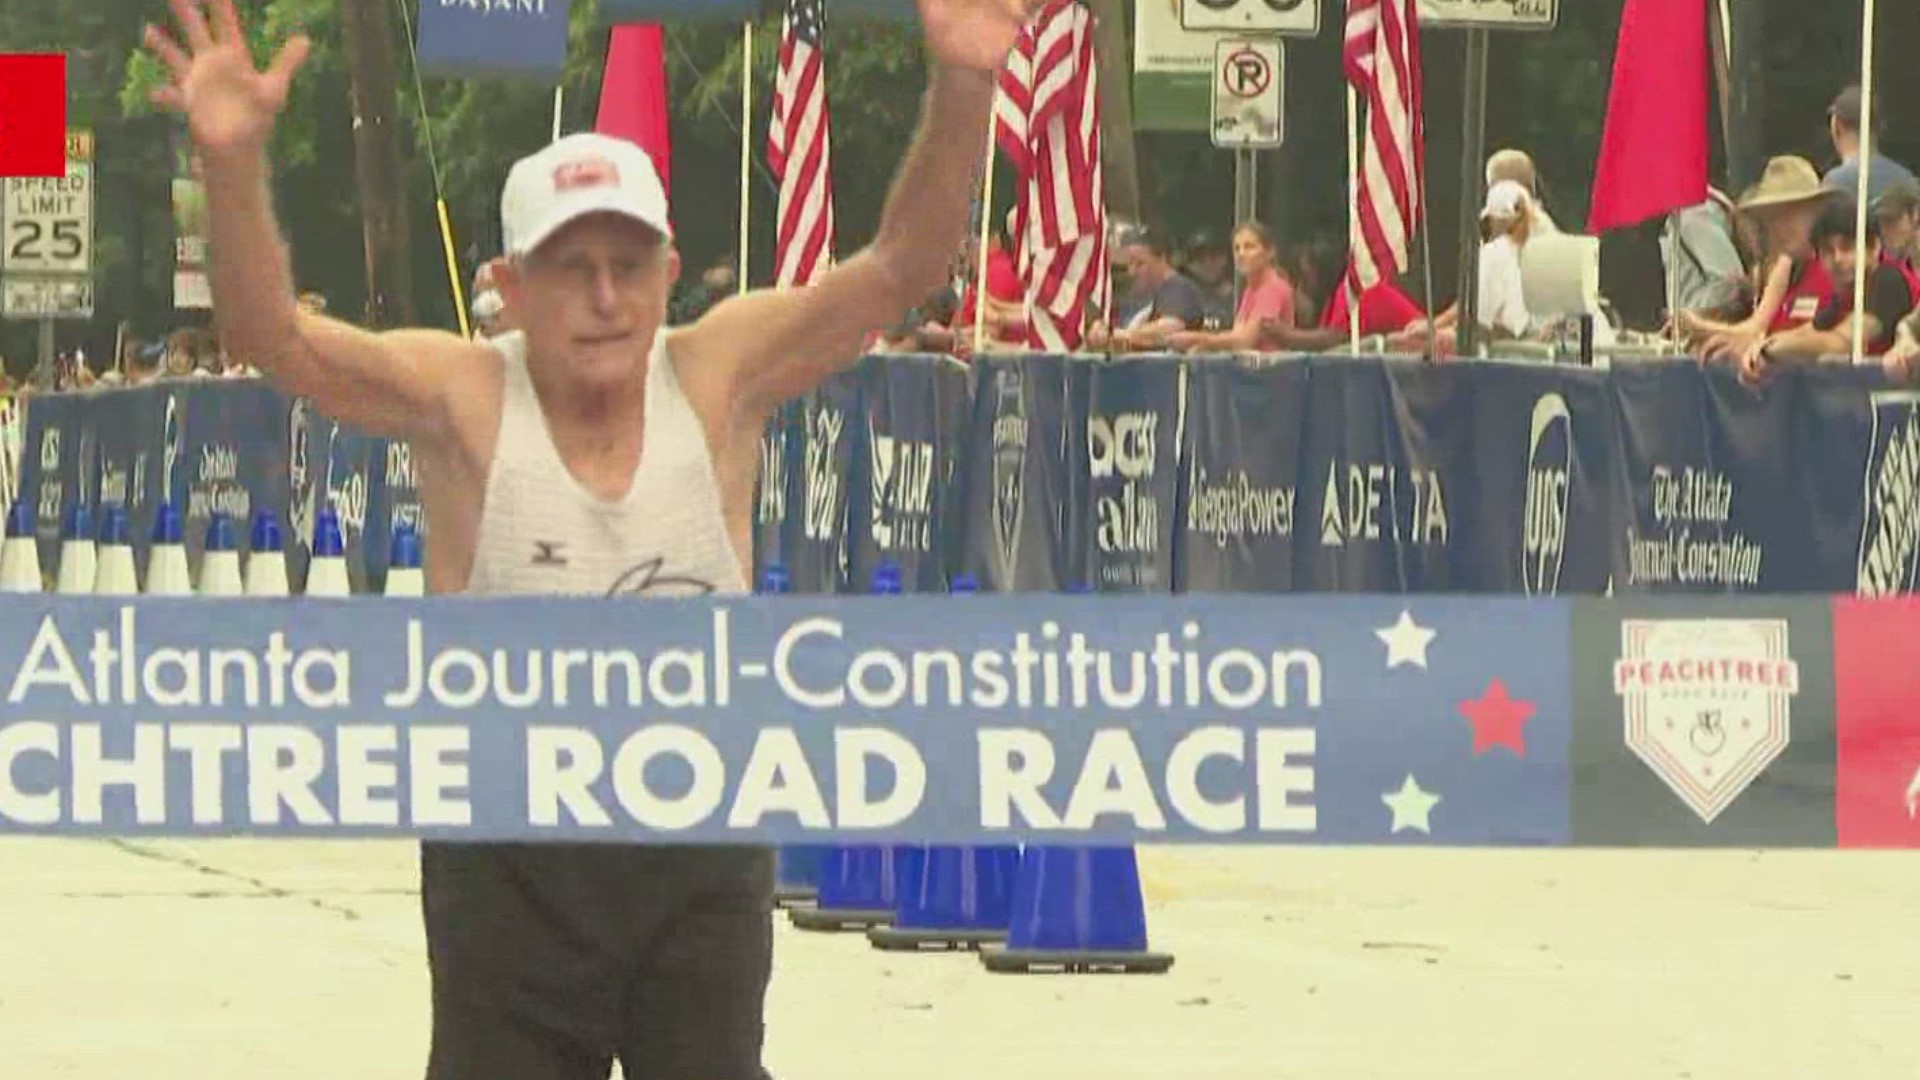 Bill Thorn until this year had run every AJC Peachtree Road Race.